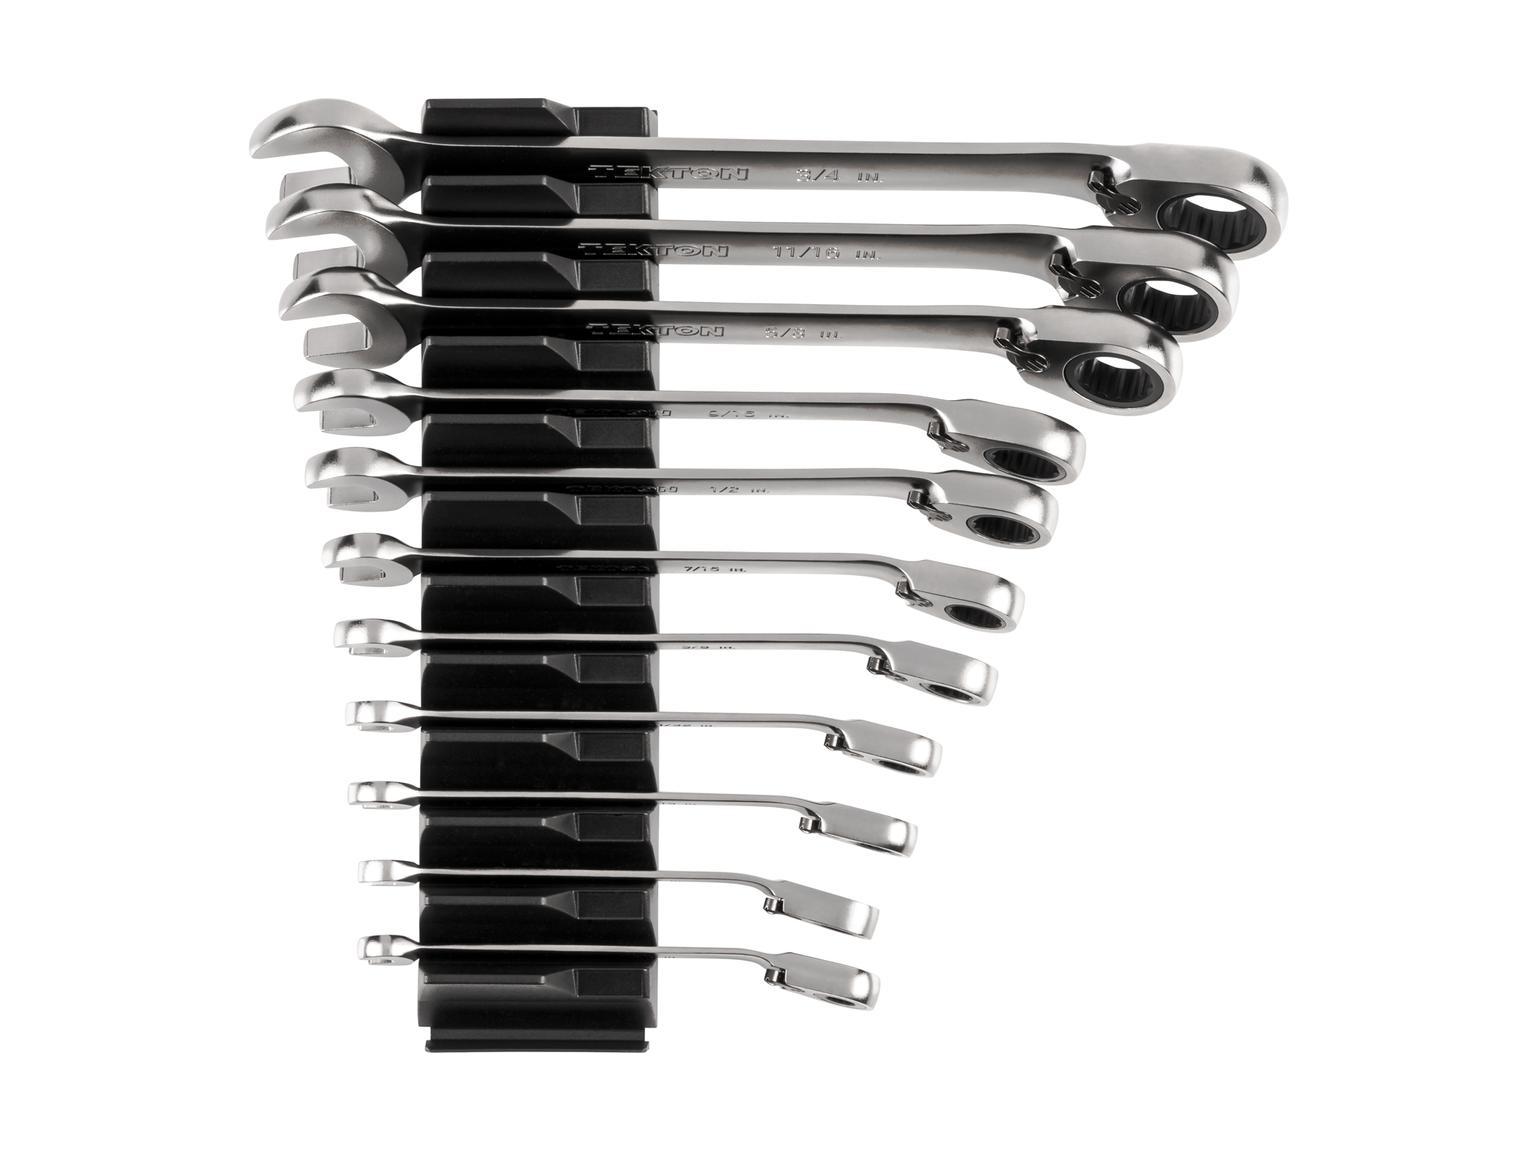 TEKTON WRC94300-T Reversible 12-Point Ratcheting Combination Wrench Set with Modular Slotted Organizer, 11-Piece (1/4-3/4 in.)